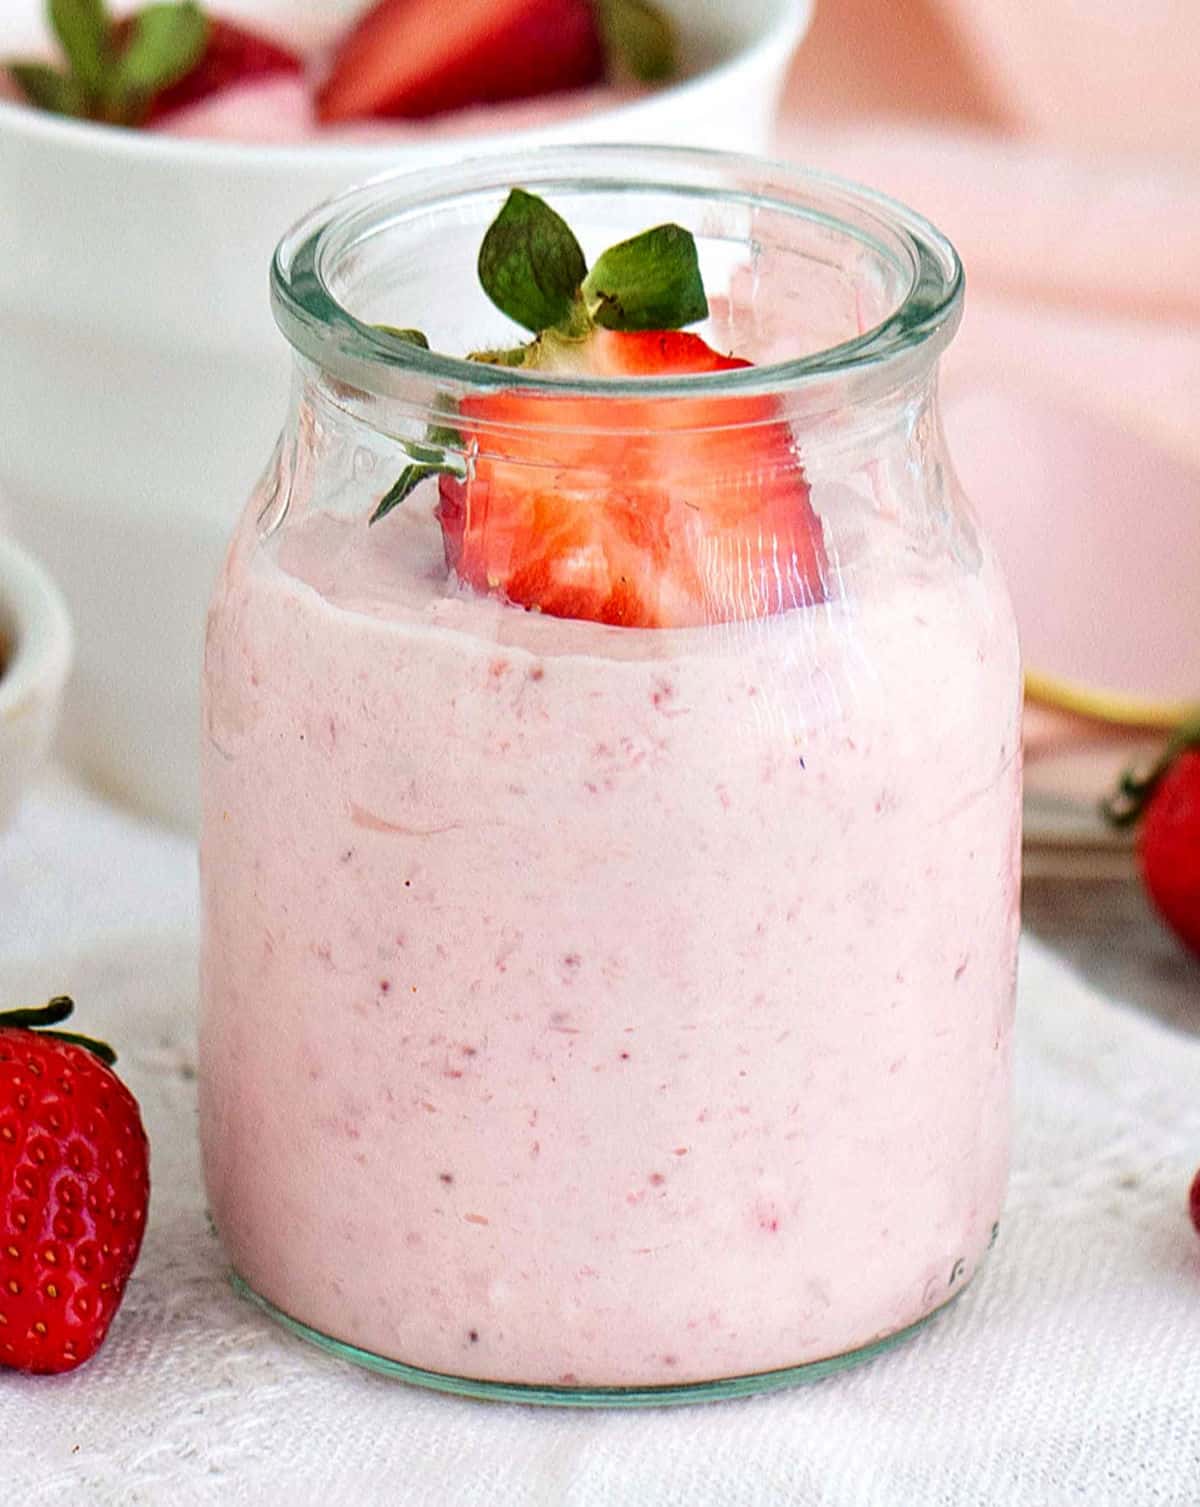 Close up of glass jar with strawberry cream dessert and half berry on top.